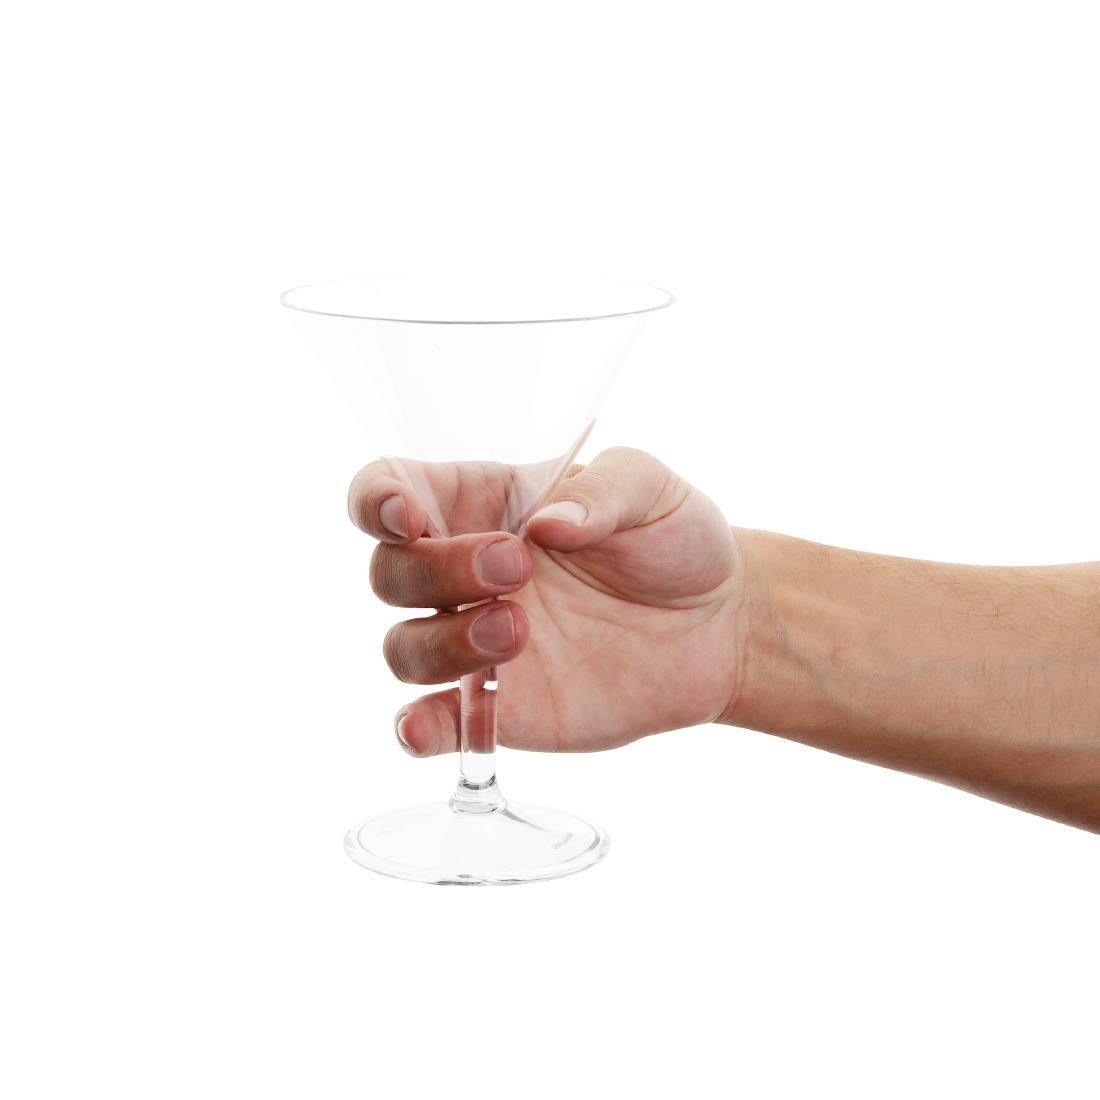 DS131 Kristallon Polycarbonate Martini Glasses 300ml (Pack of 12) JD Catering Equipment Solutions Ltd